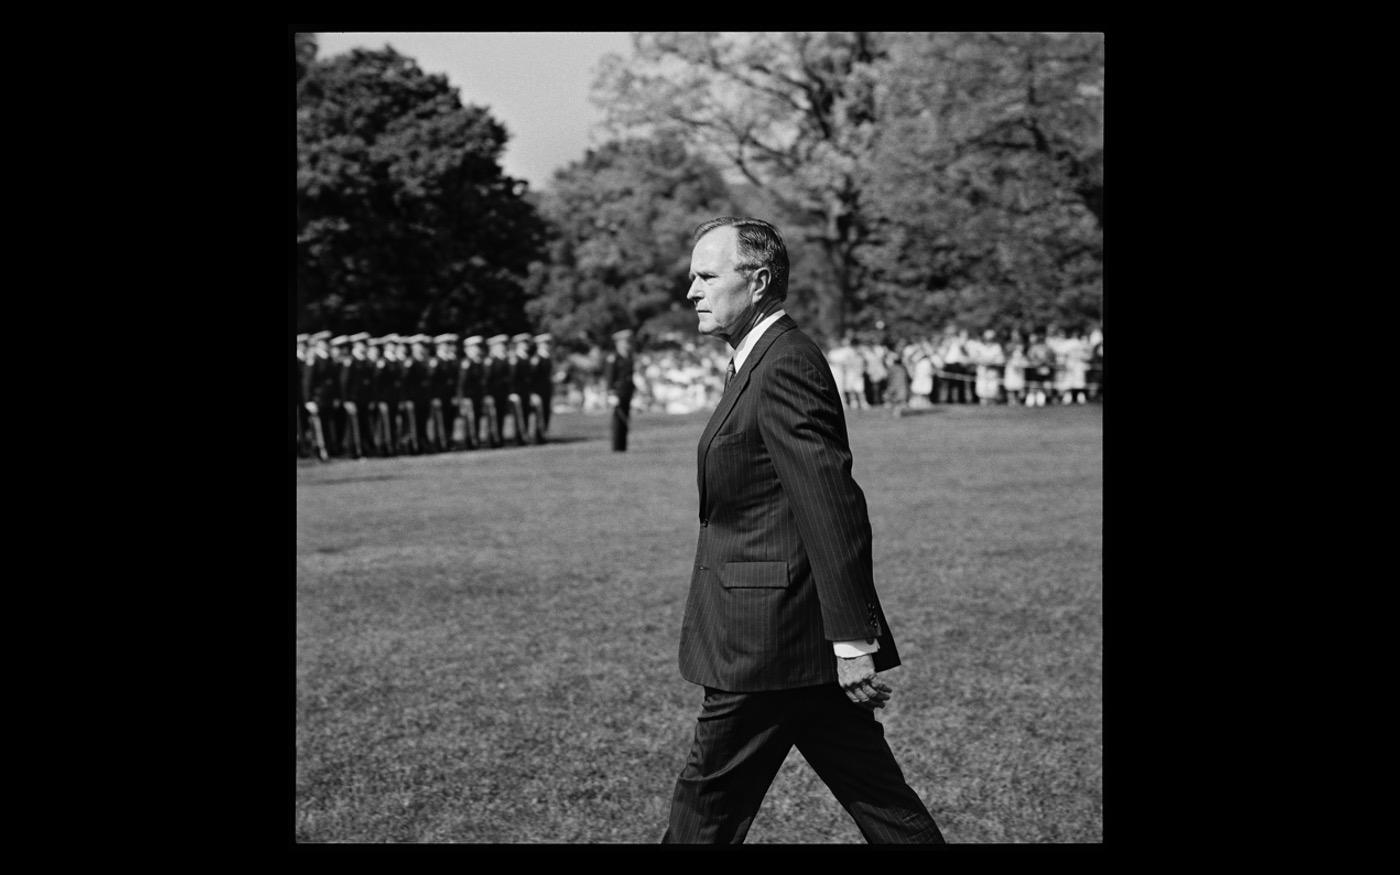 President George H W Bush at the Whtie House 1990 : Looking Back: 60 Years of Photographs : David Burnett | Photographer